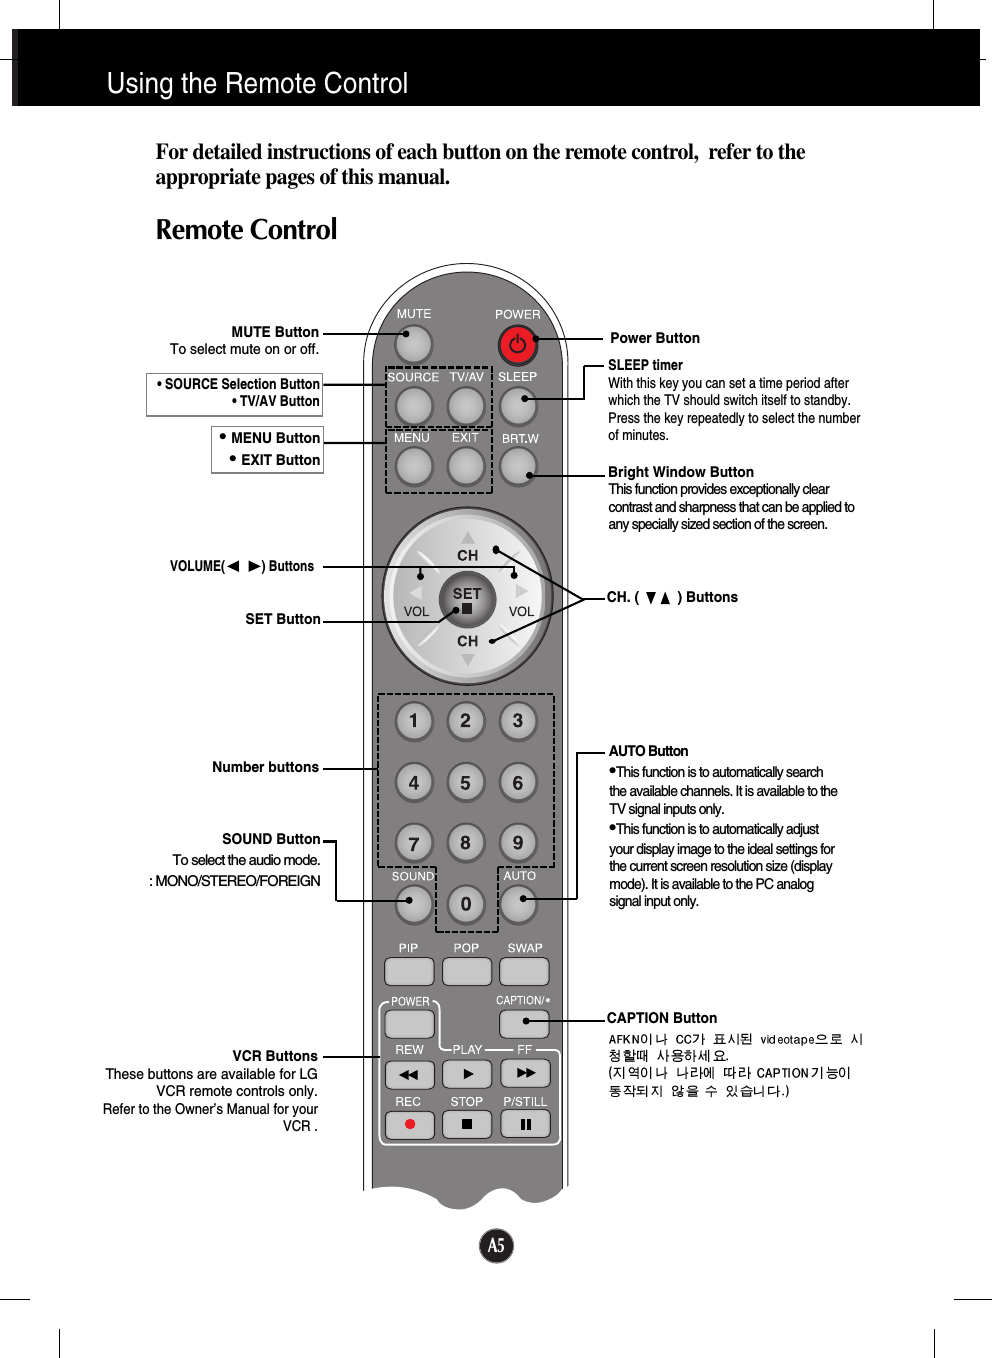 A5Using the Remote ControlRemote ControlFor detailed instructions of each button on the remote control,  refer to theappropriate pages of this manual.SOUND ButtonTo select the audio mode.: MONO/STEREO/FOREIGNVOLUME(           ) ButtonsSET Button• SOURCE Selection Button• TV/AV ButtonAUTO Button•This function is to automatically searchthe available channels. It is available to theTV signal inputs only. •This function is to automatically adjustyour display image to the ideal settings forthe current screen resolution size (displaymode). It is available to the PC analogsignal input only.MUTE ButtonTo select mute on or off.CH. (          ) ButtonsVCR ButtonsThese buttons are available for LGVCR remote controls only.Refer to the Owner’s Manual for yourVCR .Power ButtonBright Window ButtonThis function provides exceptionally clearcontrast and sharpness that can be applied toany specially sized section of the screen.SLEEP timerWith this key you can set a time period afterwhich the TV should switch itself to standby.Press the key repeatedly to select the numberof minutes.CAPTION ButtonNumber buttons• MENU Button• EXIT Button